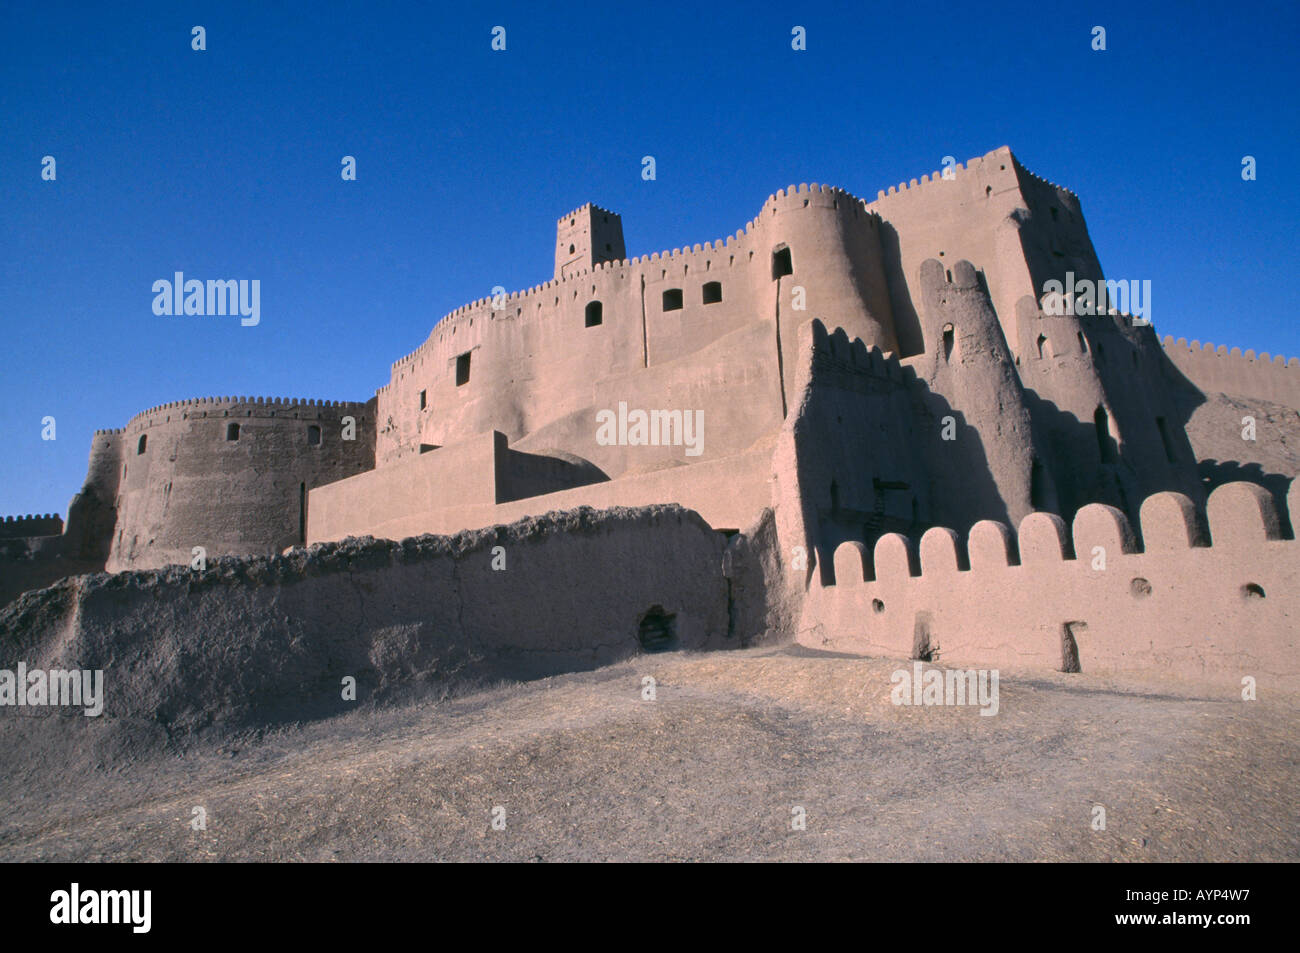 IRAN Central Asia Middle East Kerman Province Bam Arg e Bam Citadel castle fort before the 2003 earthquake destroyed the town Stock Photo